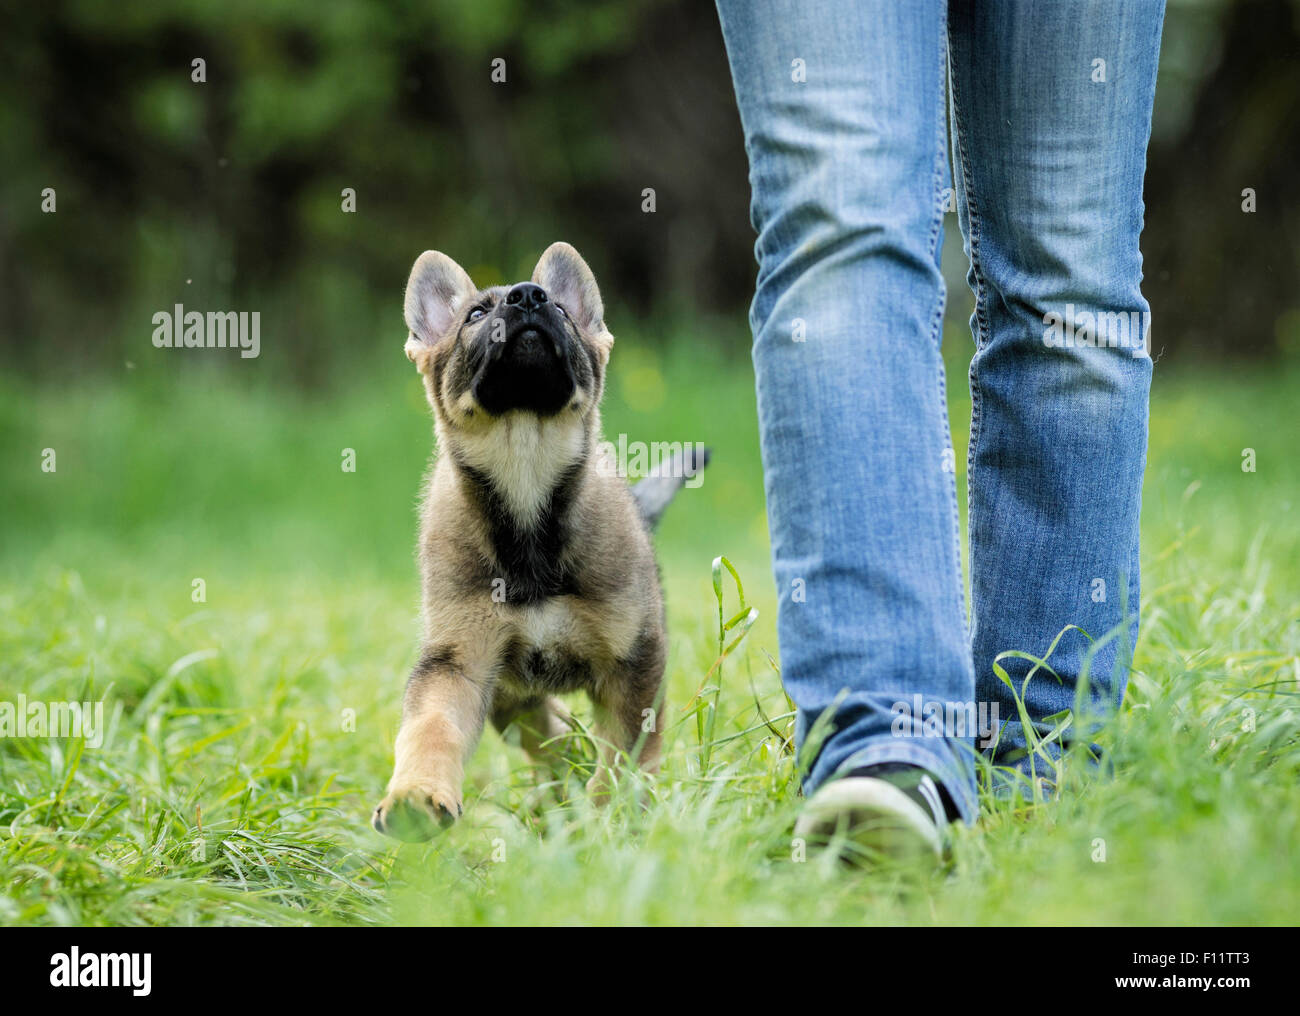 German Shepherd, Alsatian Puppy walking next to person while looking up Stock Photo